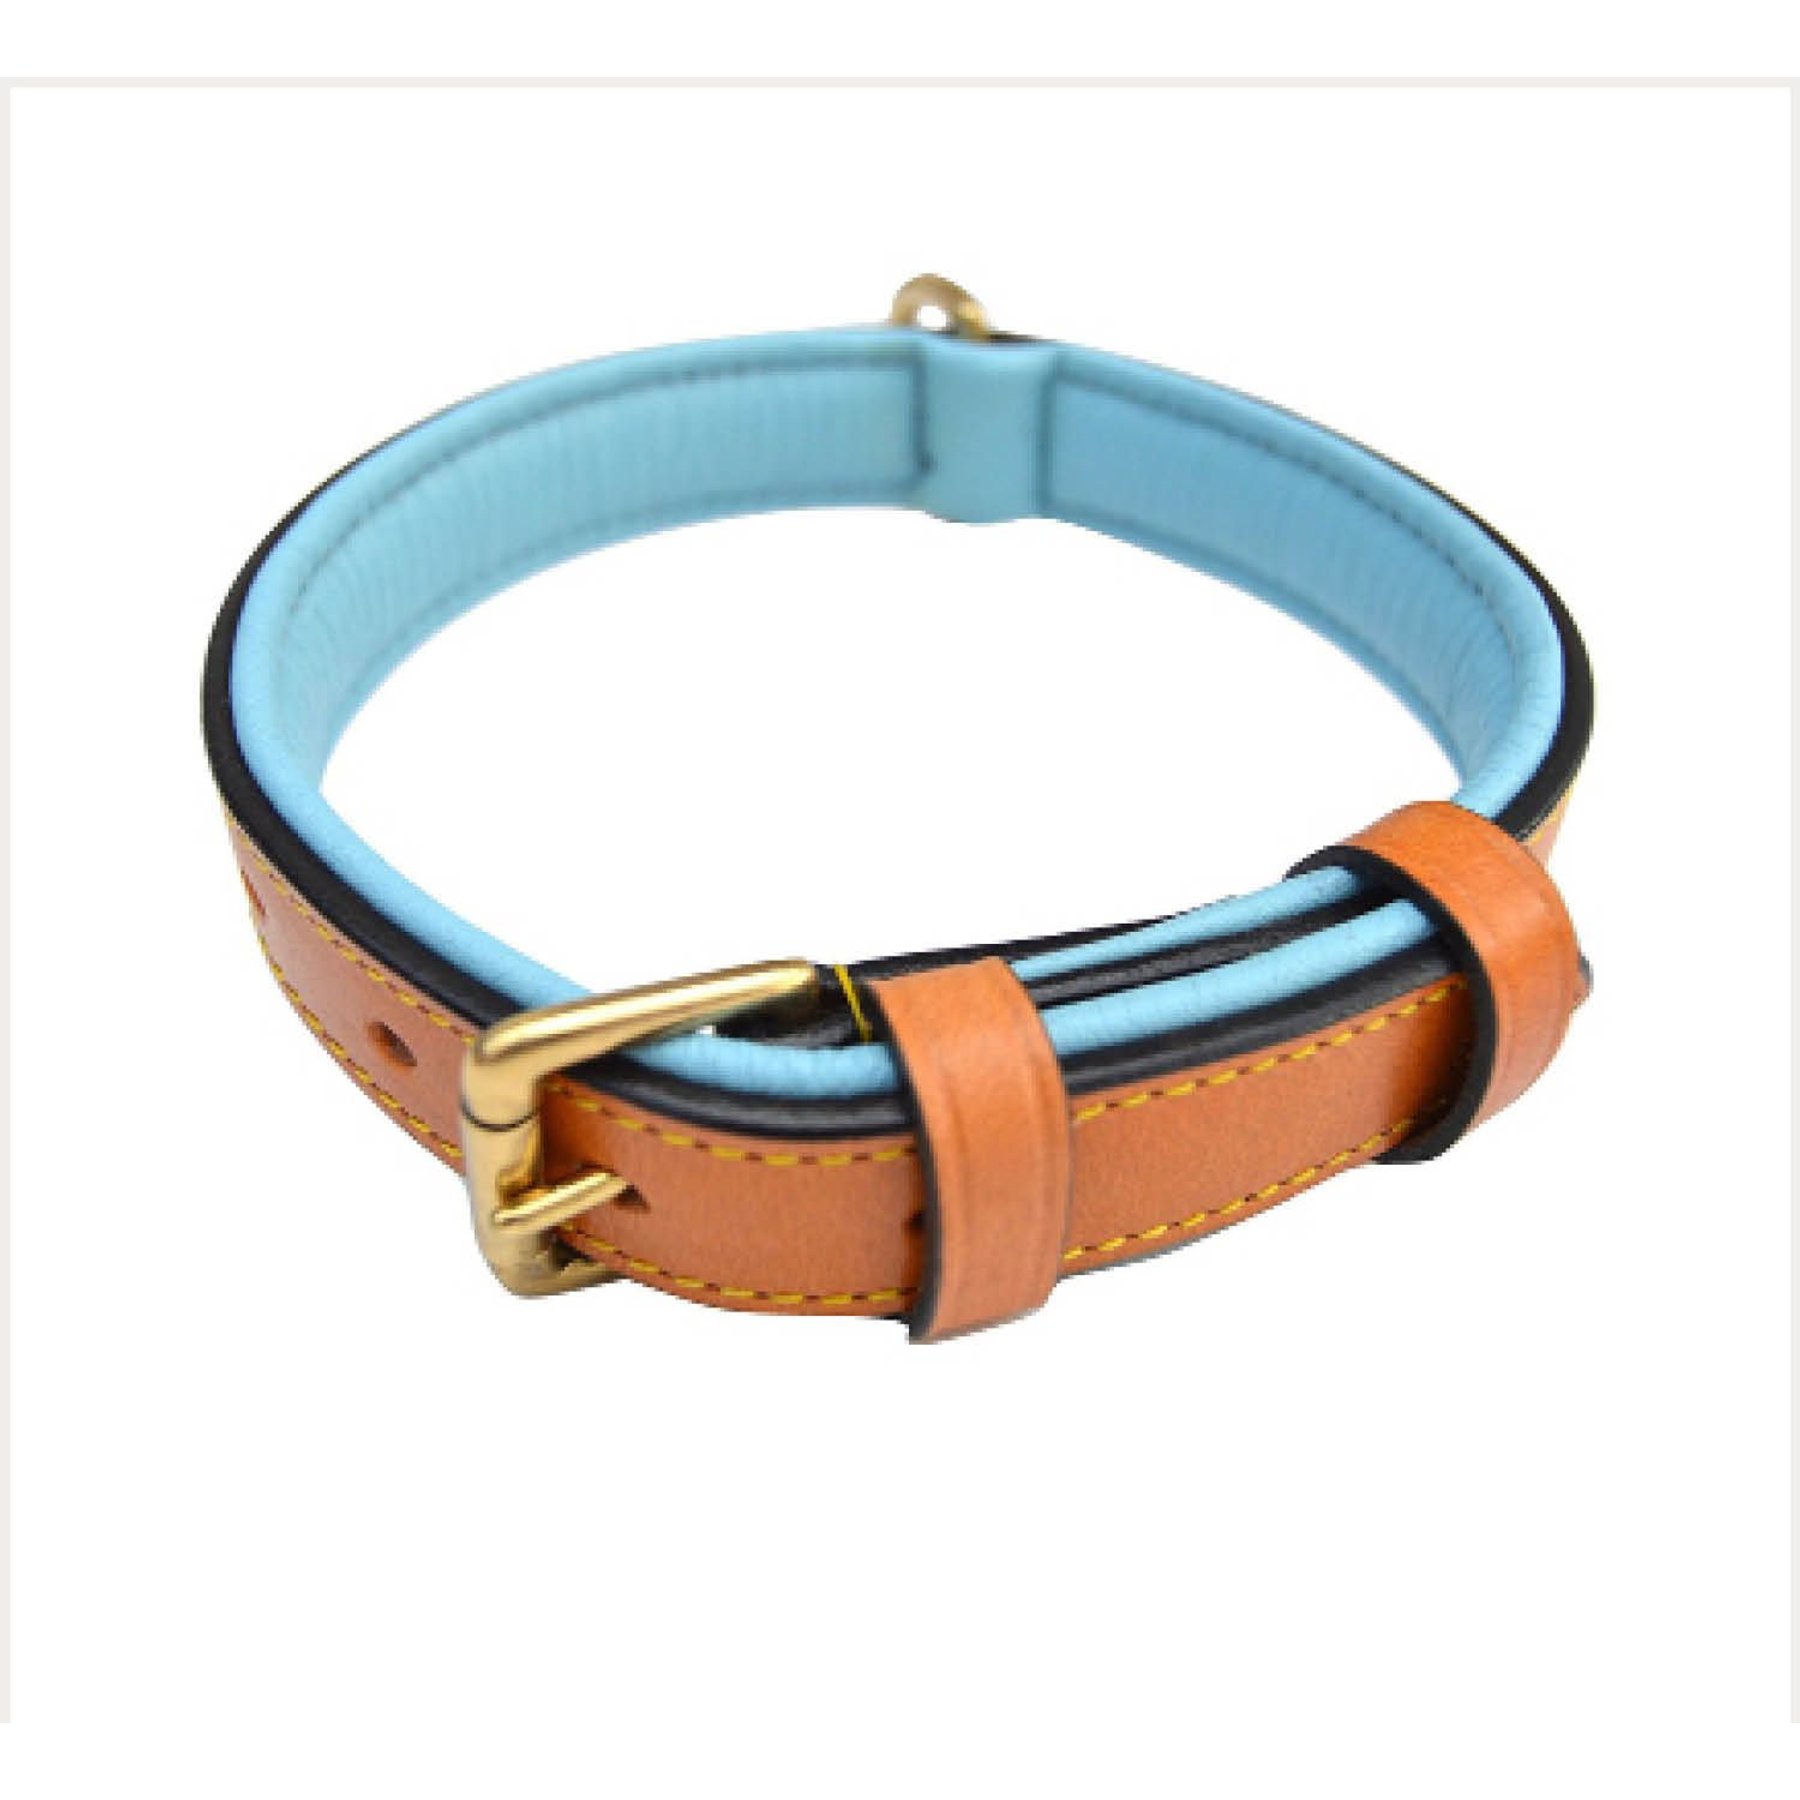 Blueberry Pet Braided Leather Dog Collar